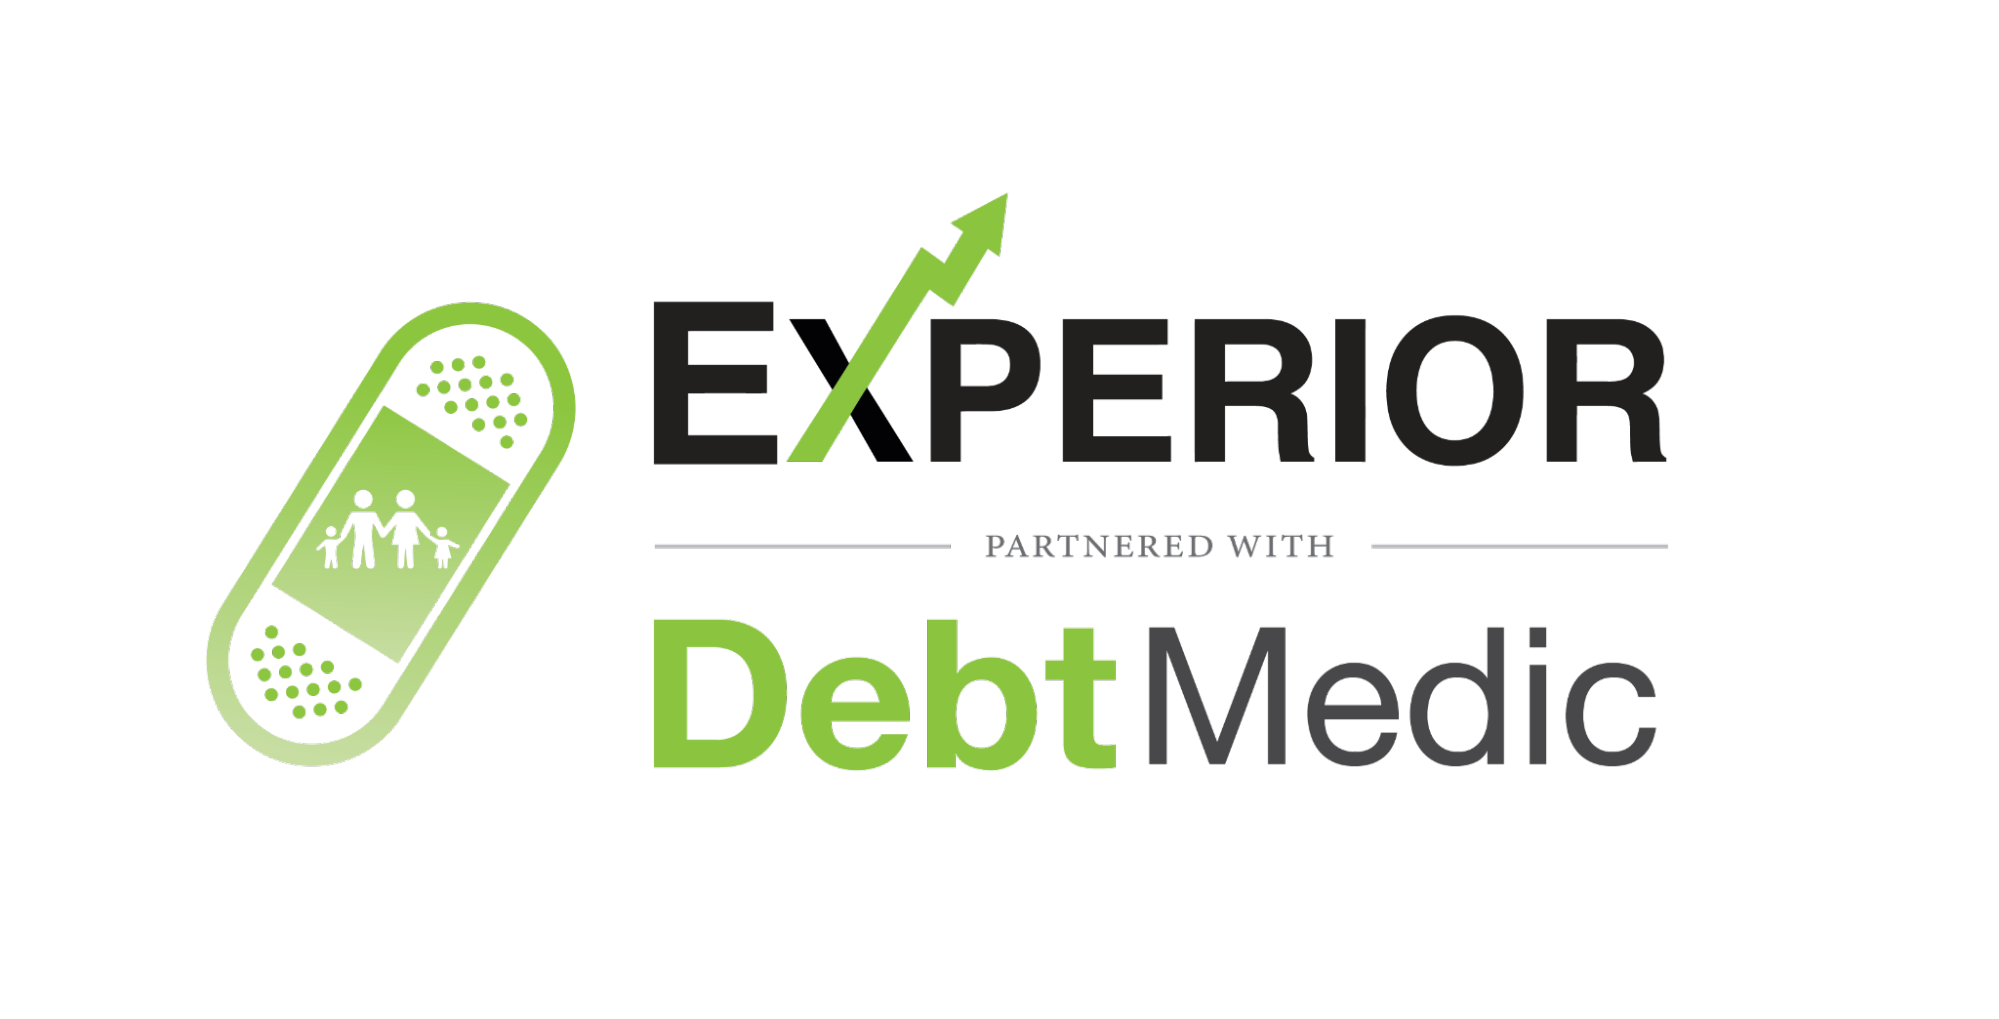 Experior Financial Group partnered with Debt Medic